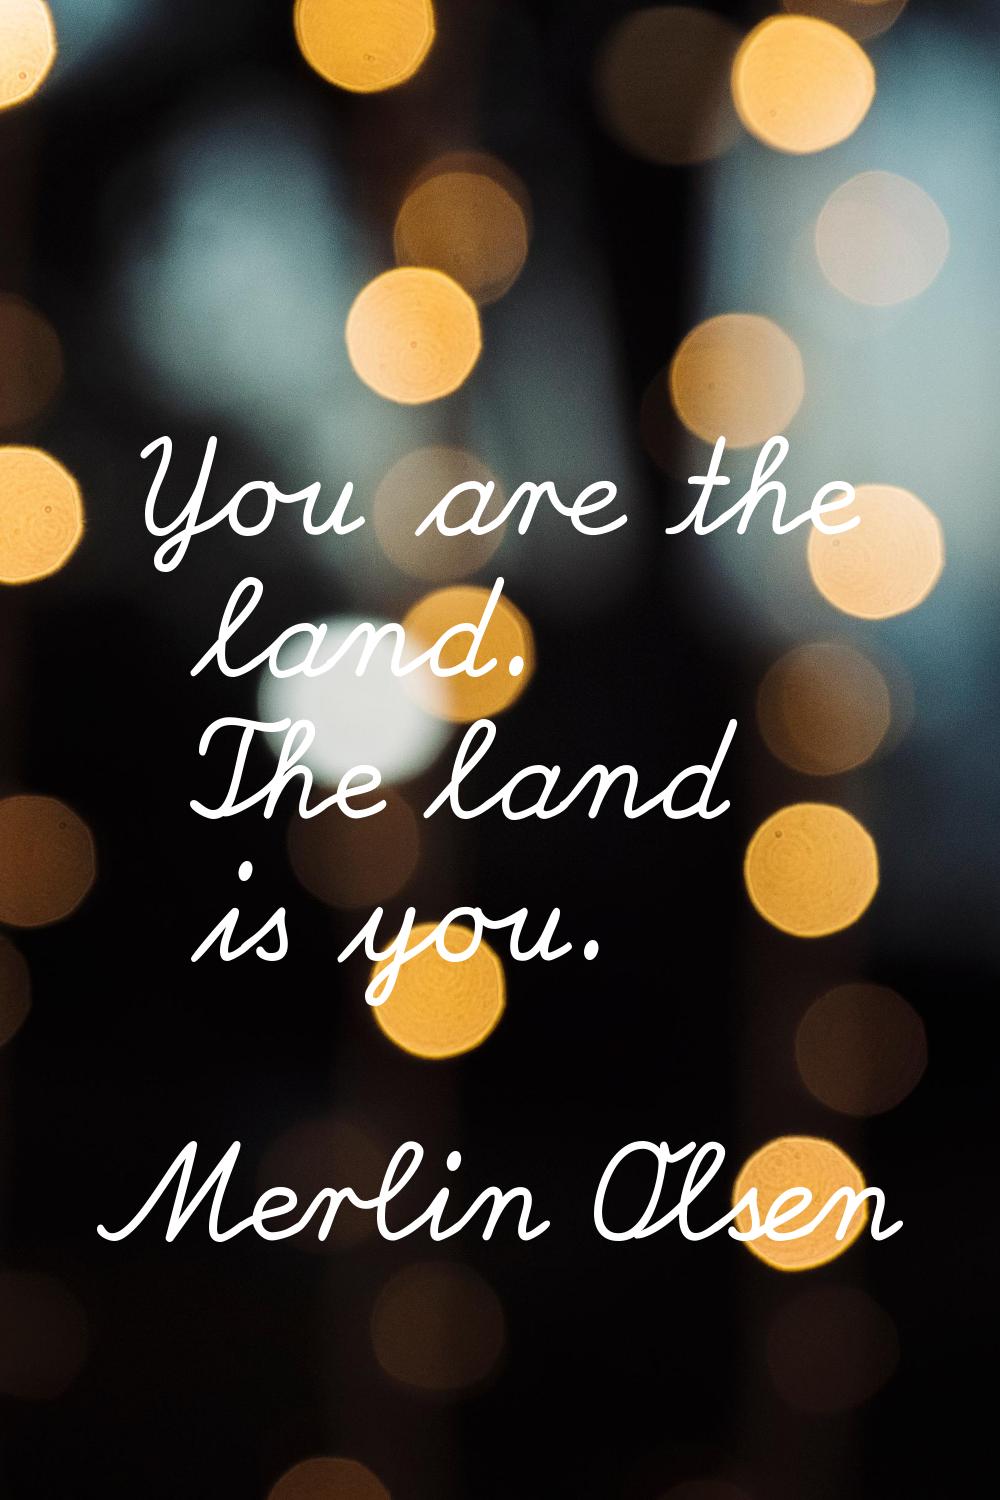 You are the land. The land is you.